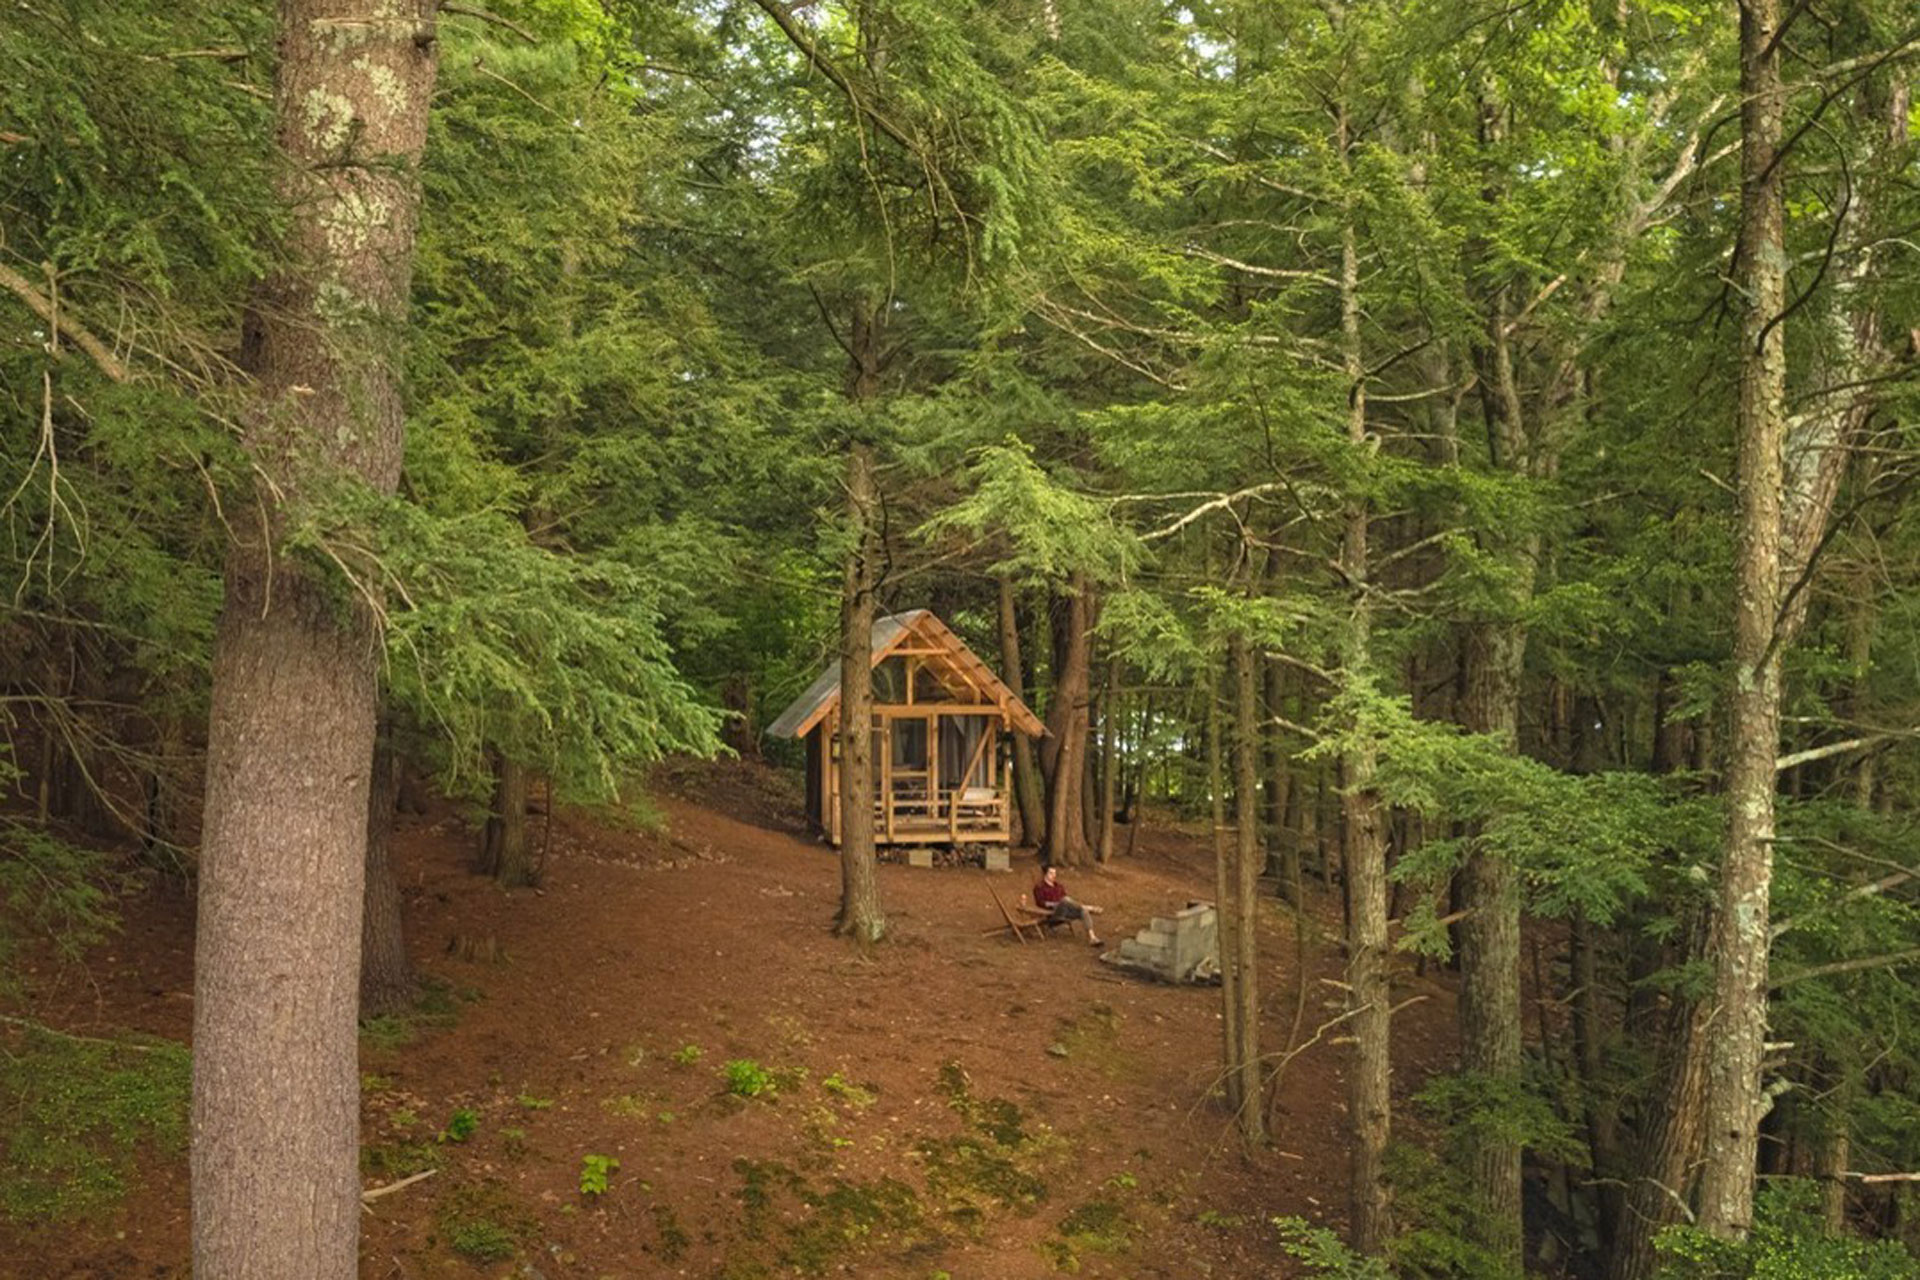 Treehouse on a farm in Vermont